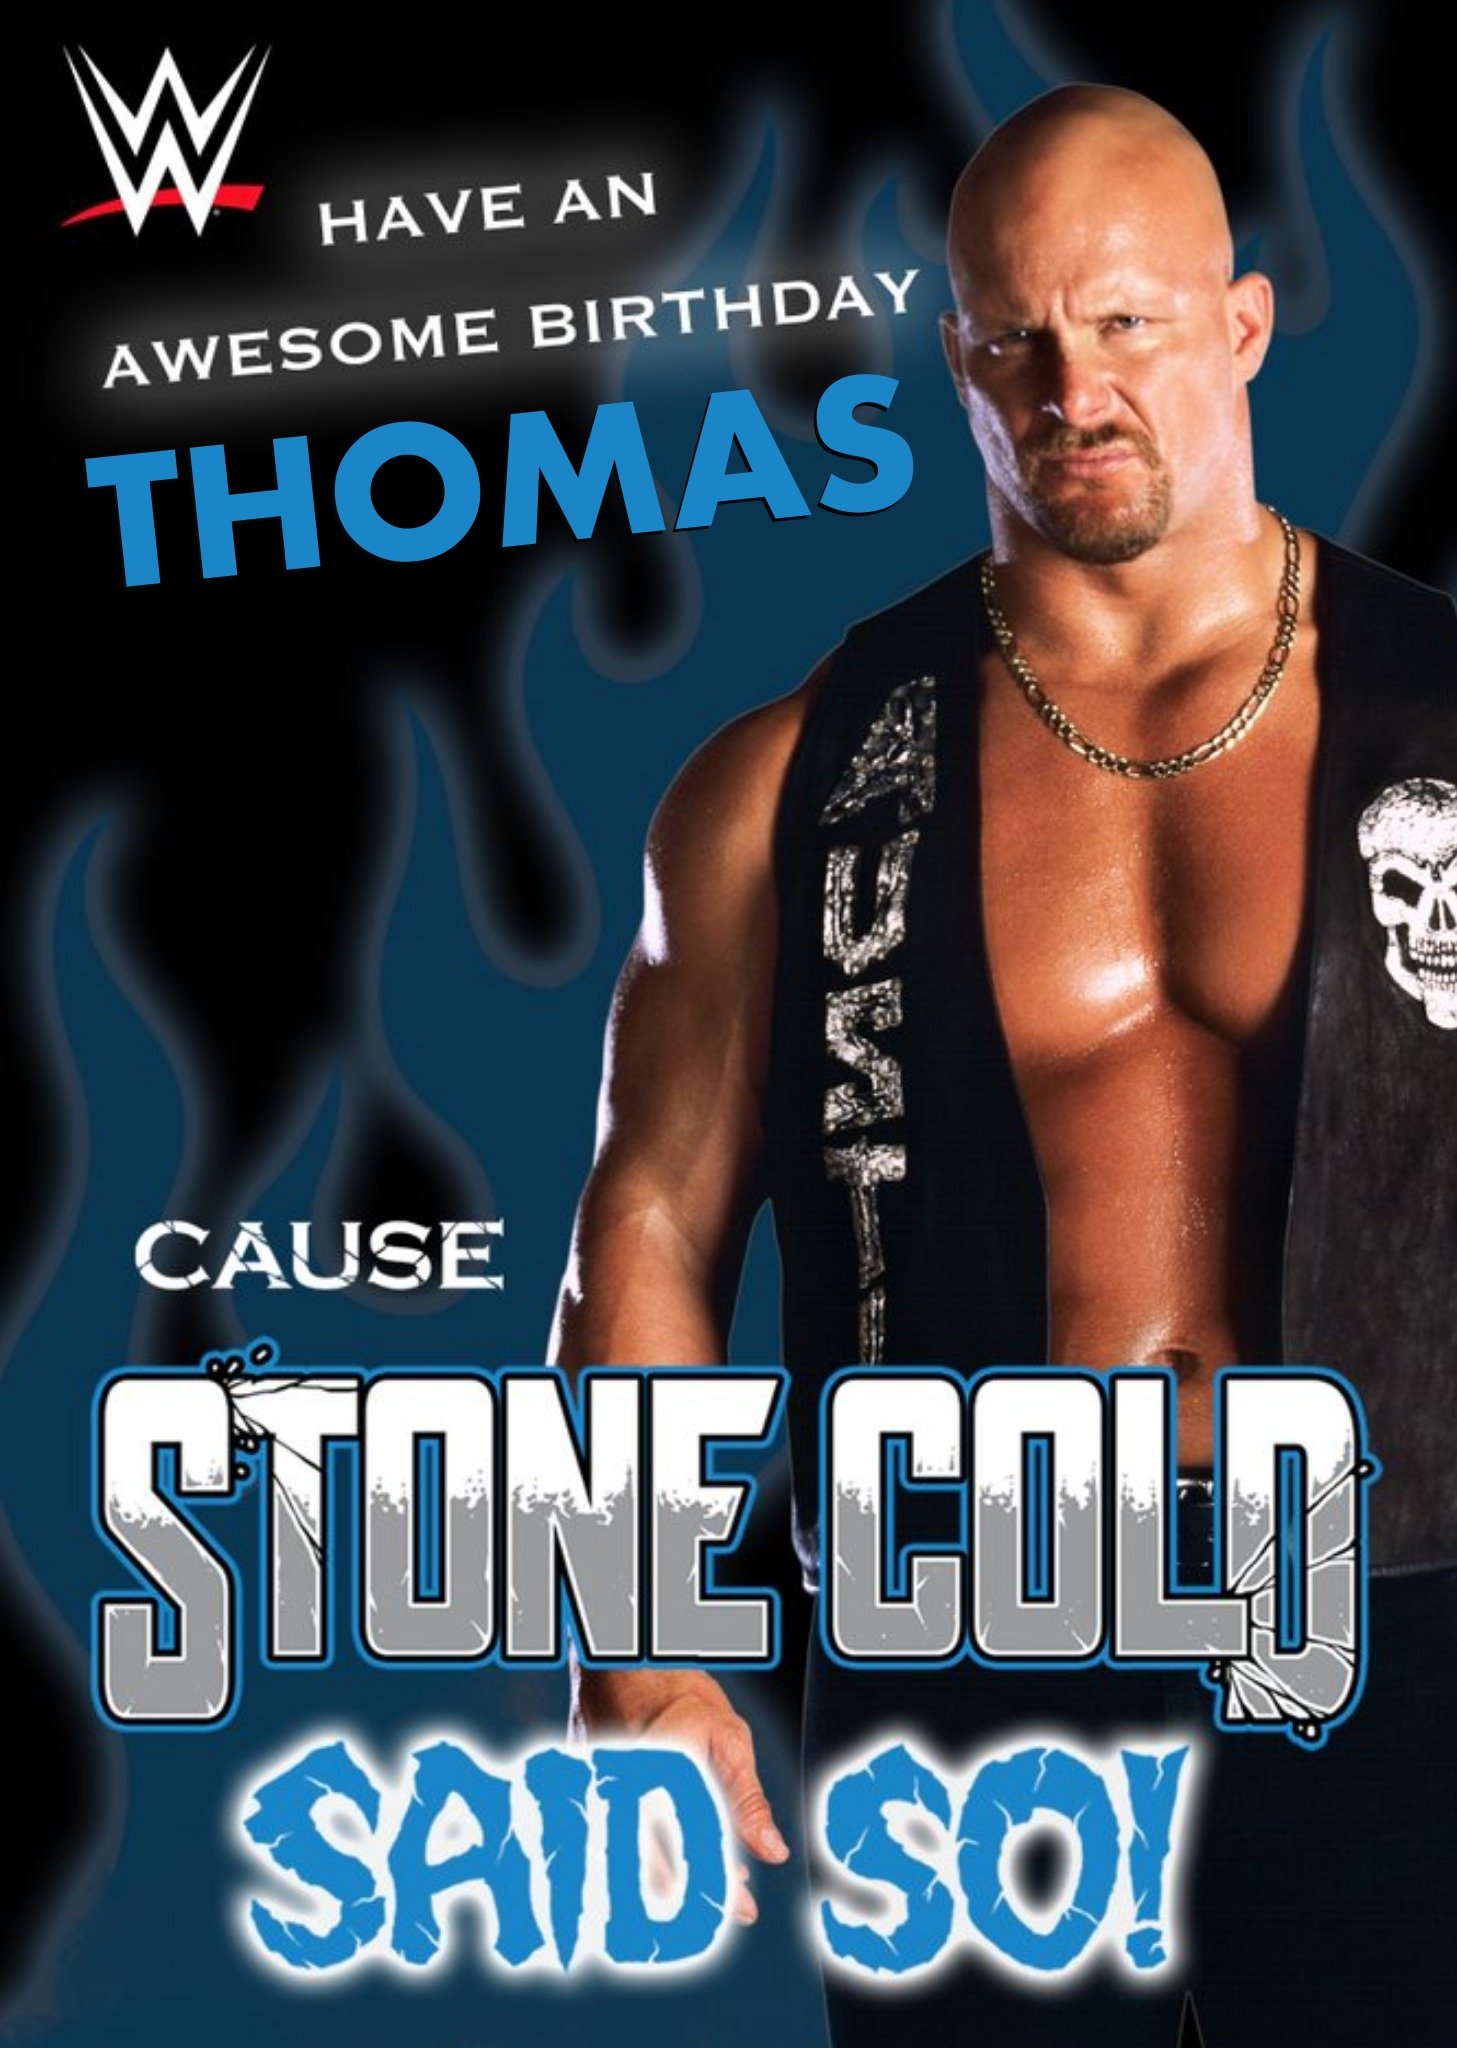 Wwe Have An Awesome Birthday Cause Stone Cold Said So Card Ecard